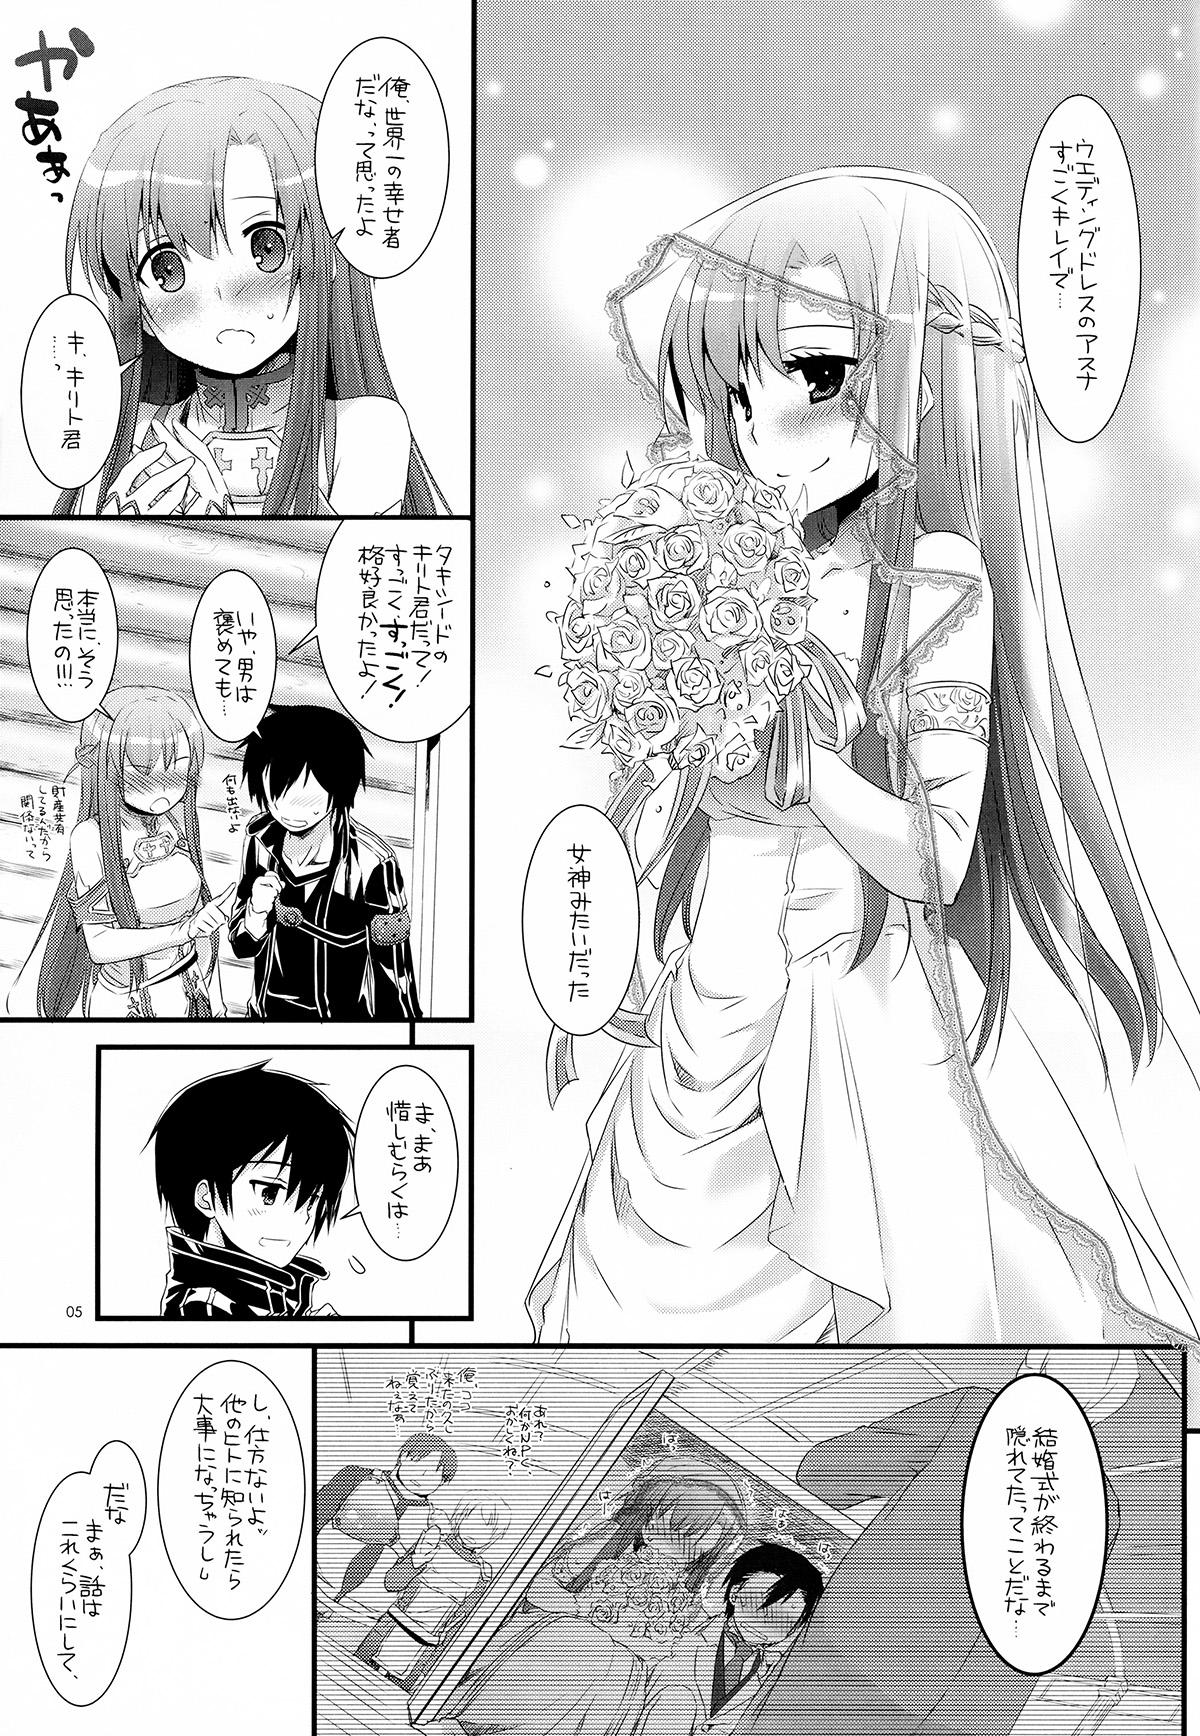 Gay Reality D.L.action 71 - Sword art online Gay Bang - Page 5